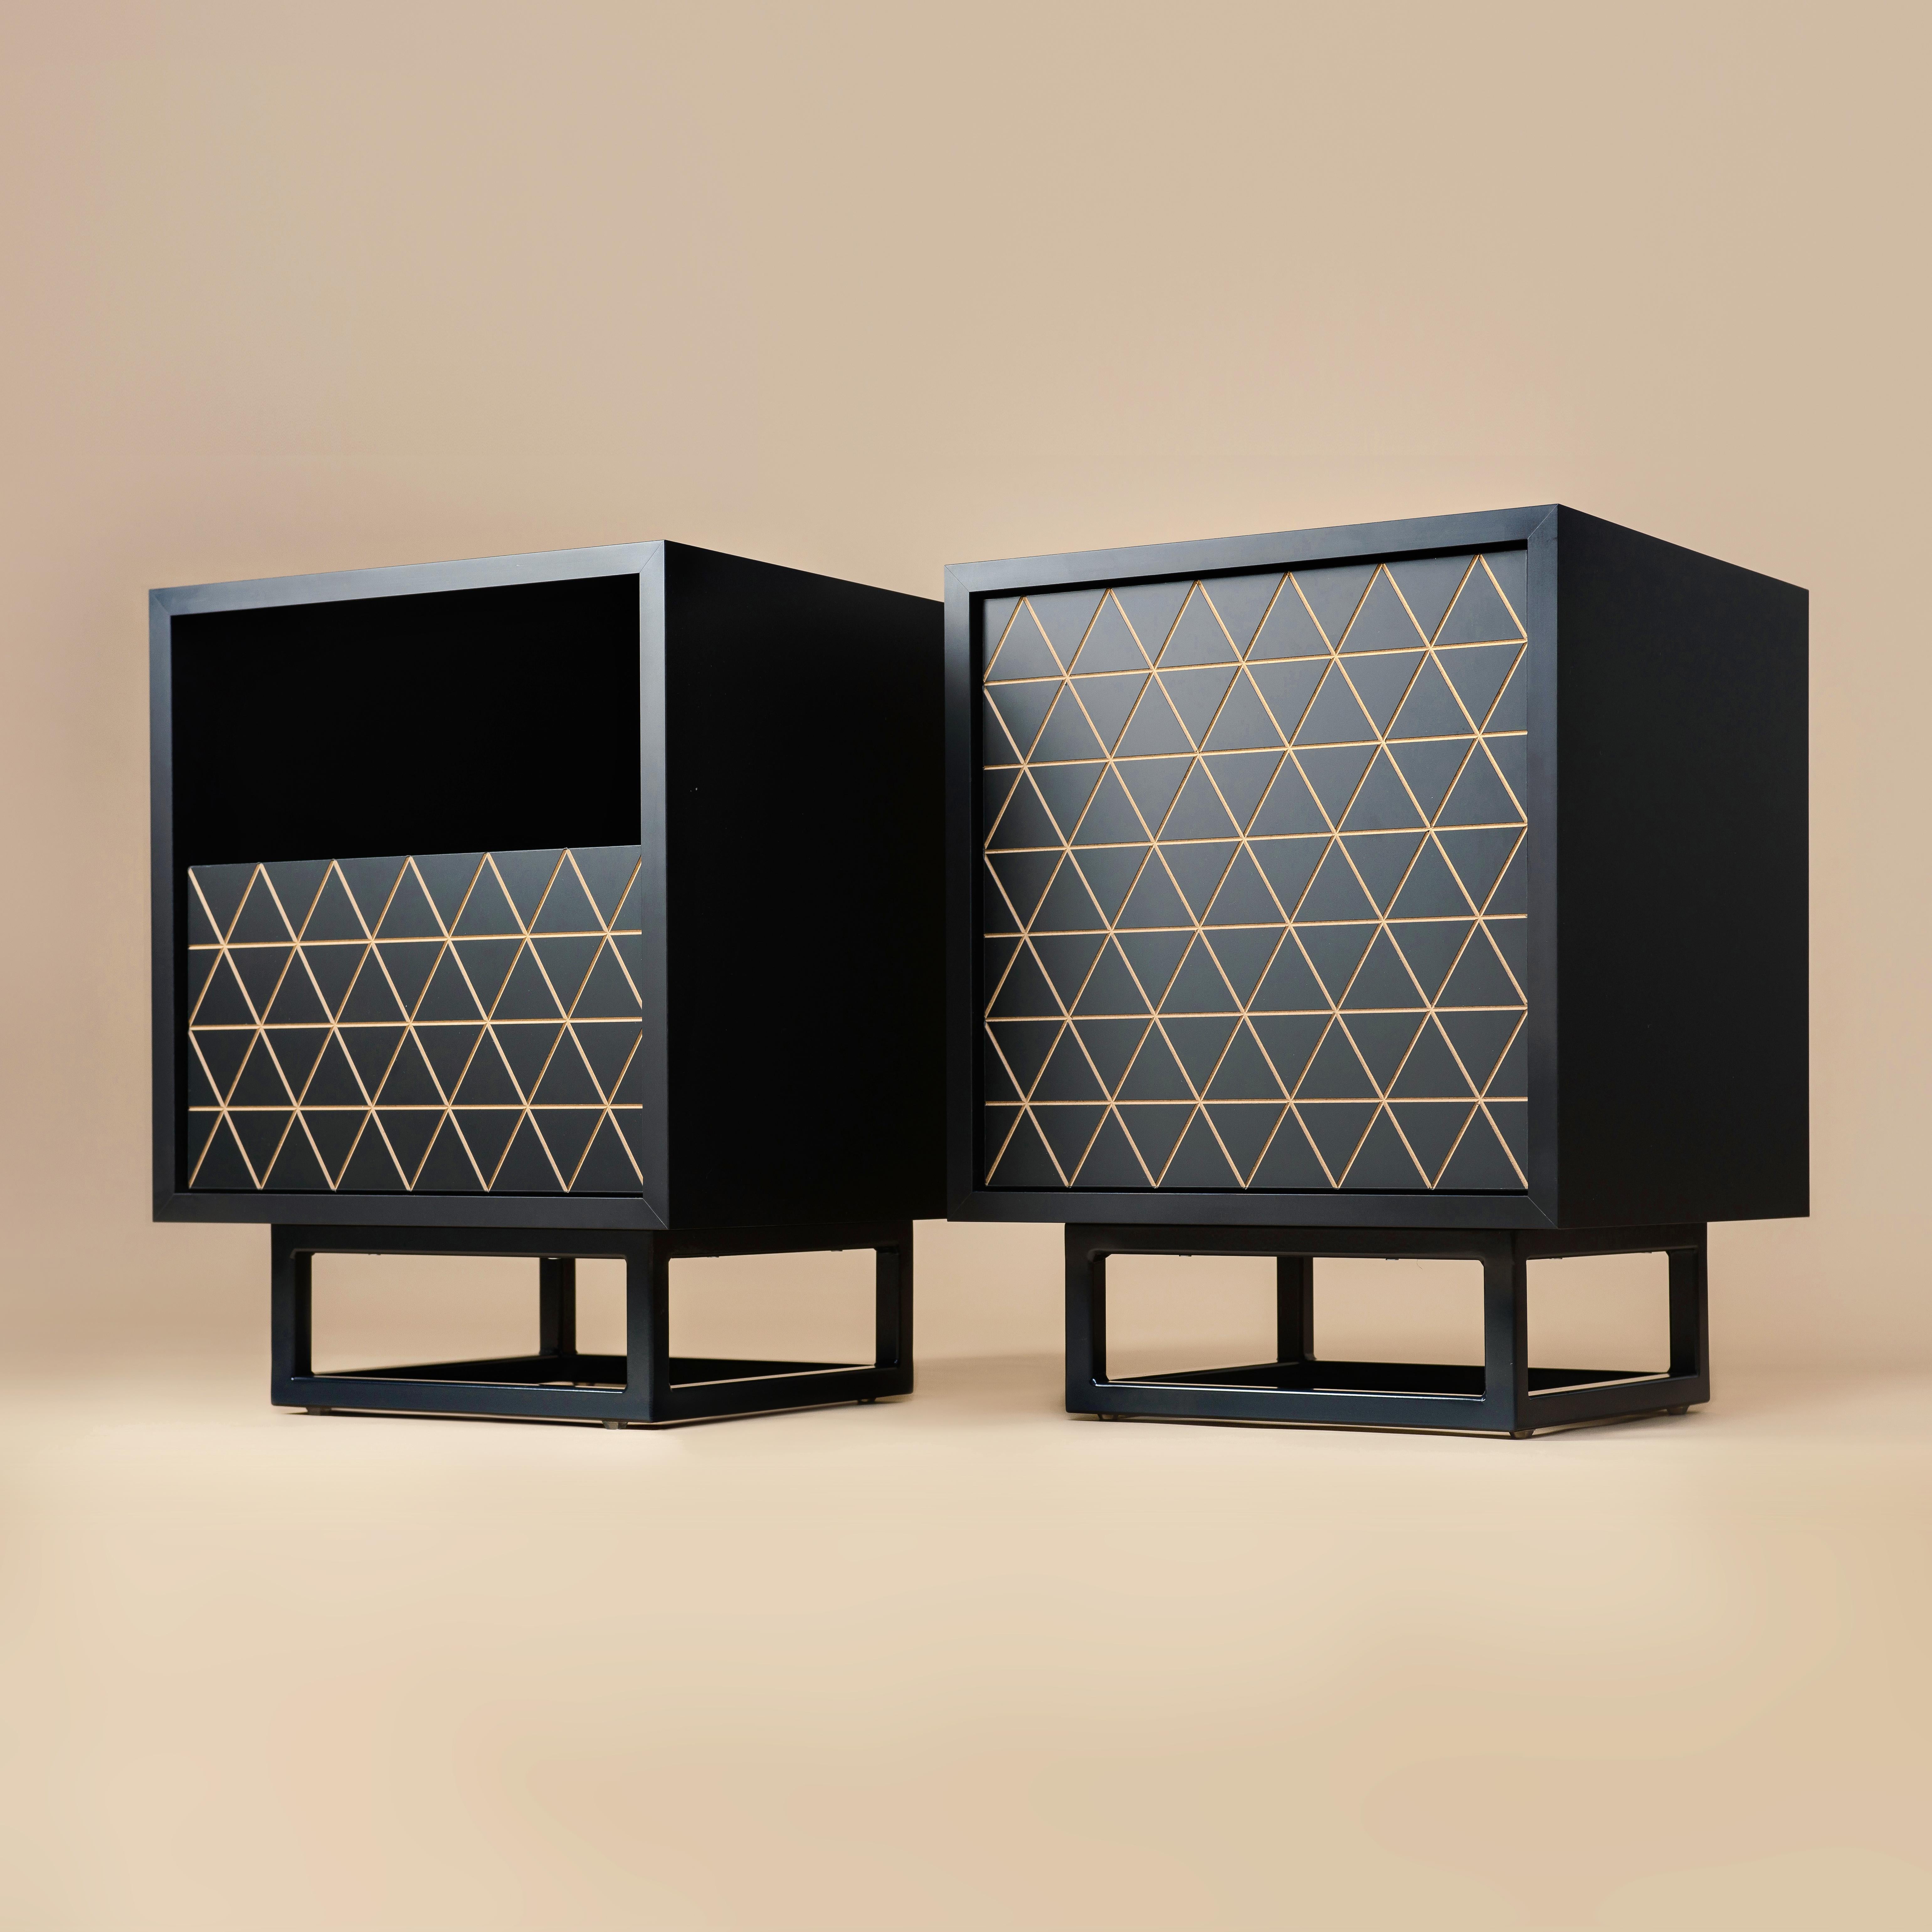 Set of 2 LOWBO XS nightstands by Phormy
Dimensions: D 40 x W 40 x H 53 cm.
Materials: acrylic engraved or flat laminate oak powder coated steel base

Different materials and sizes available.

LOWBO is a simplicity and minimalism introduced